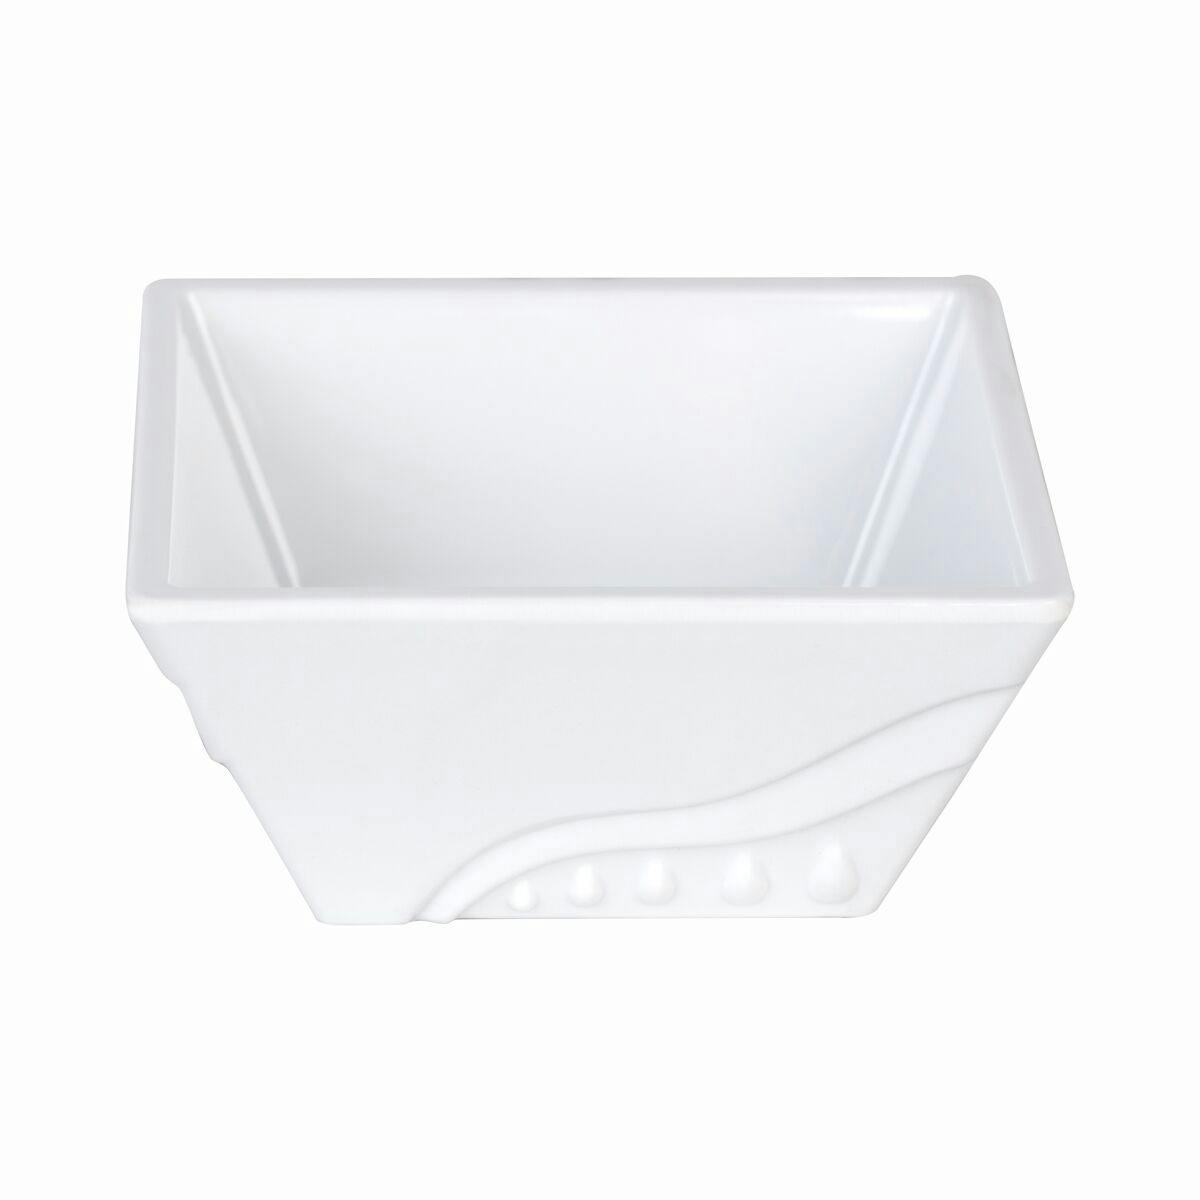 (10 pieces) Melamine tray for etagerie/ buffet stand - height: 100mm